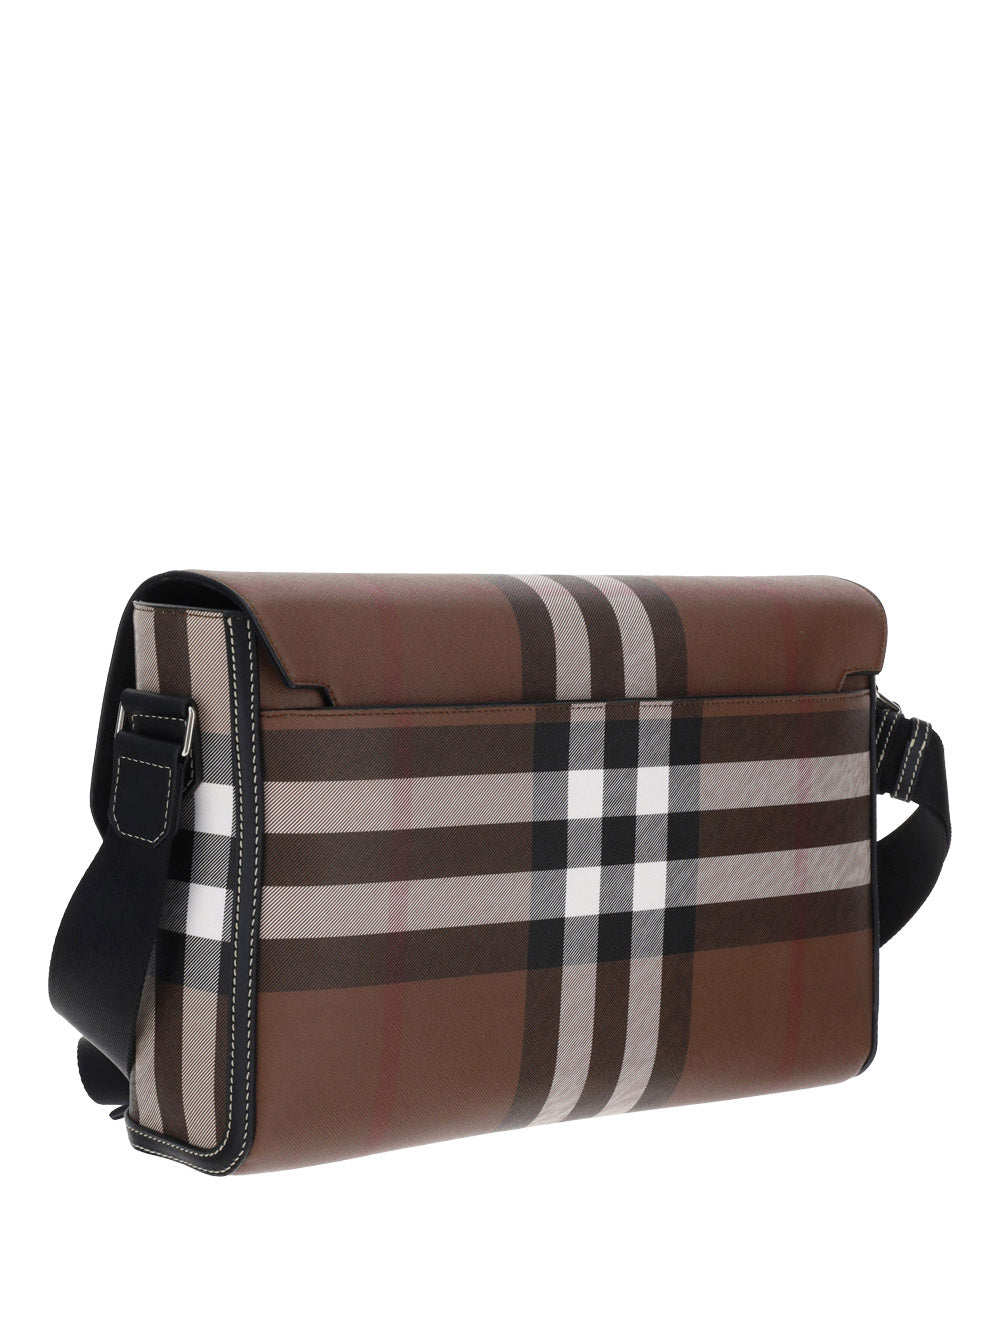 Burberry Exaggerated Check Leather Tote